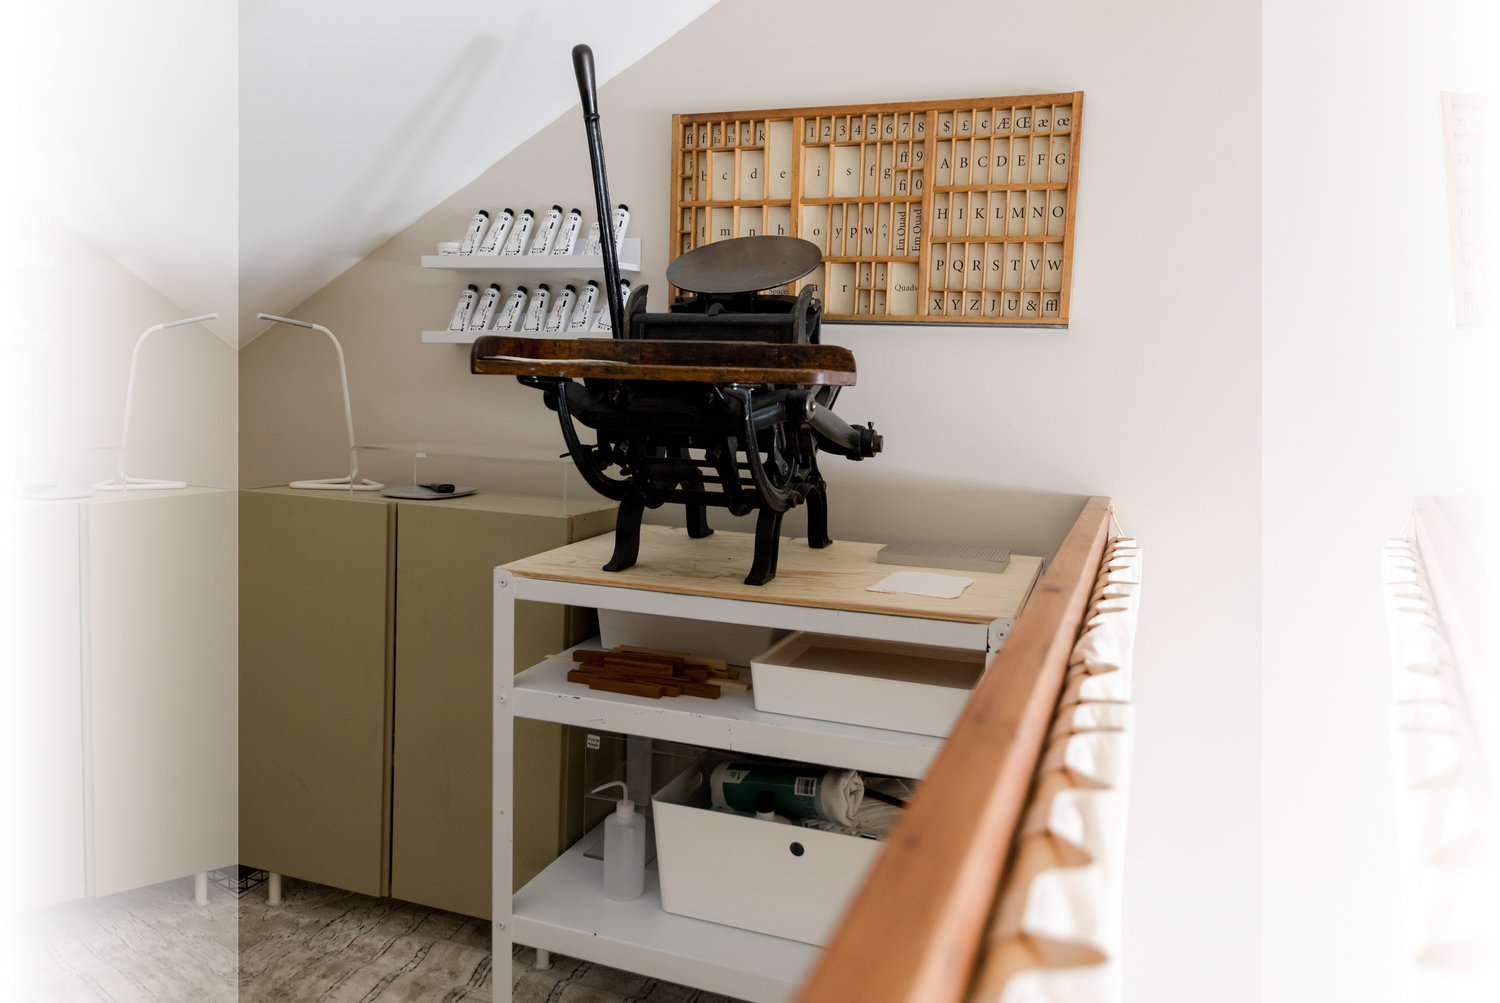 A letterpress and its accoutrements are both hobby and utilitarian art